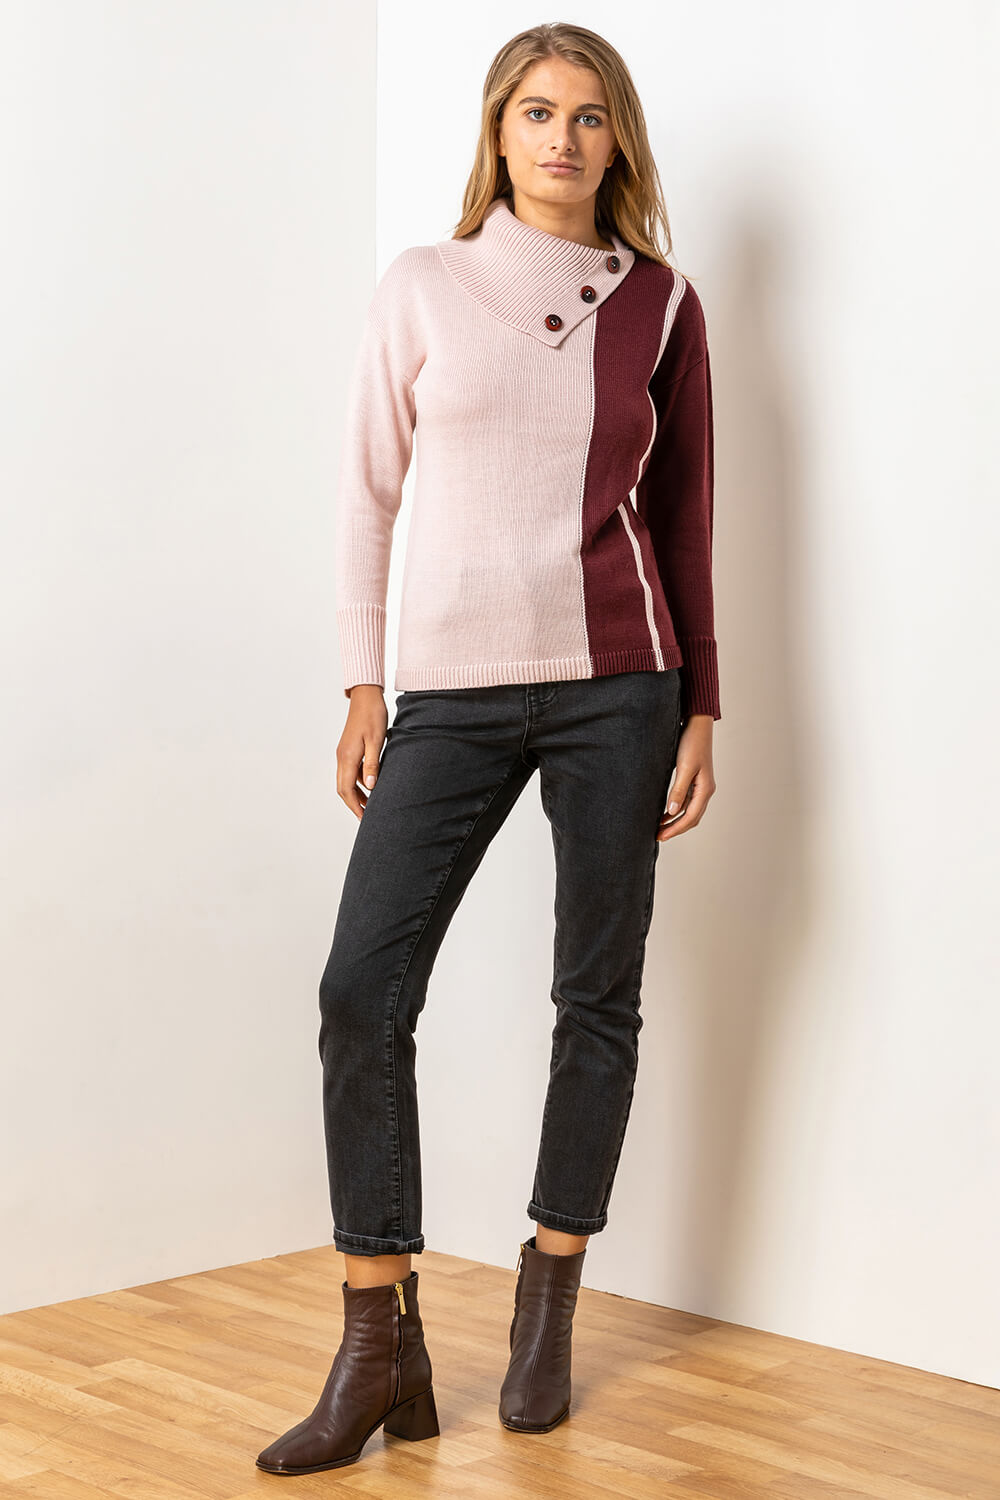 PINK Colourblock Cowl Neck Button Jumper, Image 4 of 5